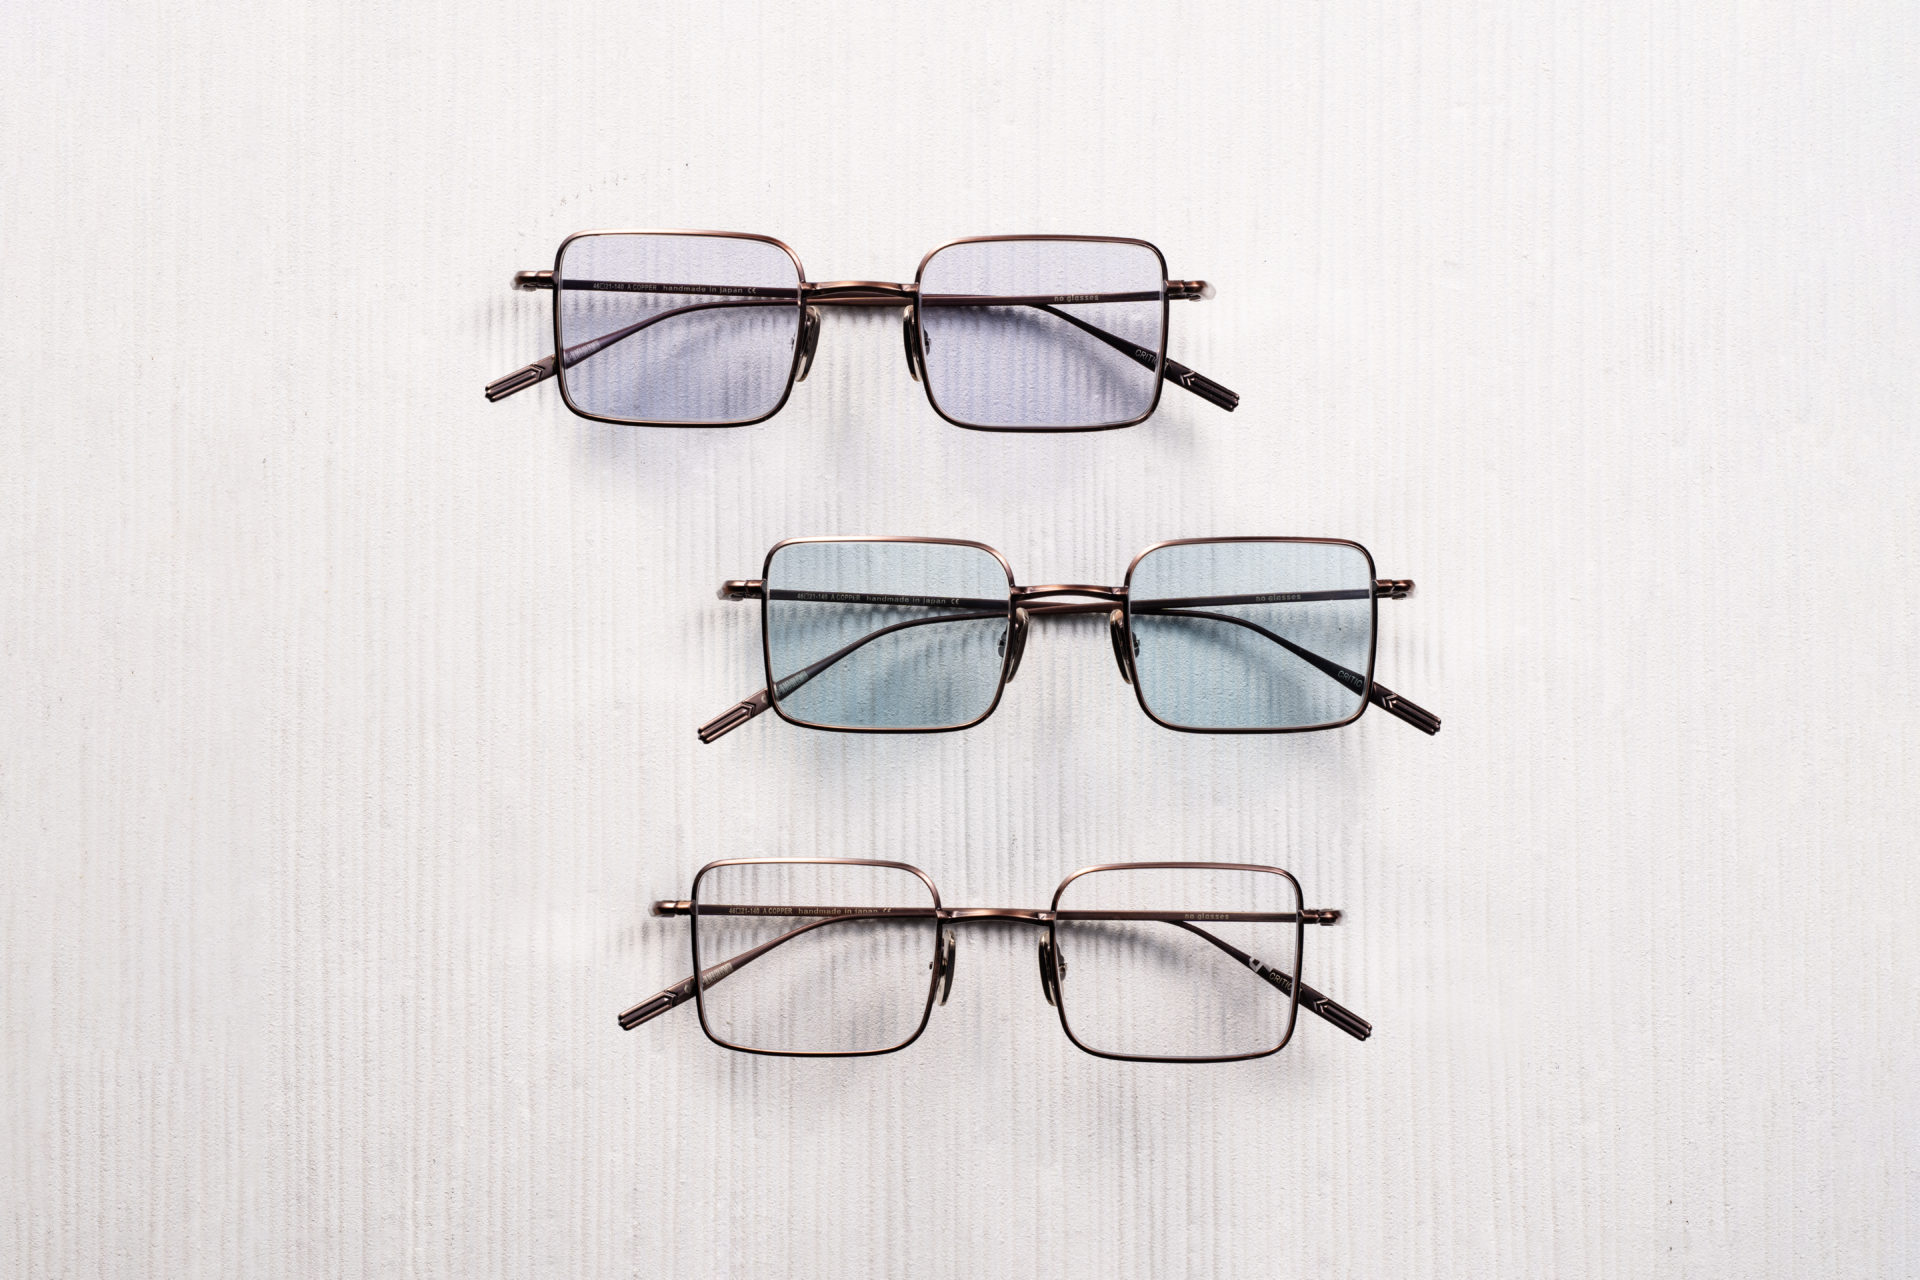 Launched【EXCLUSIVE COLLECTIONS】OG×OLIVER GOLDSMITH CRITIC Ⅱ for